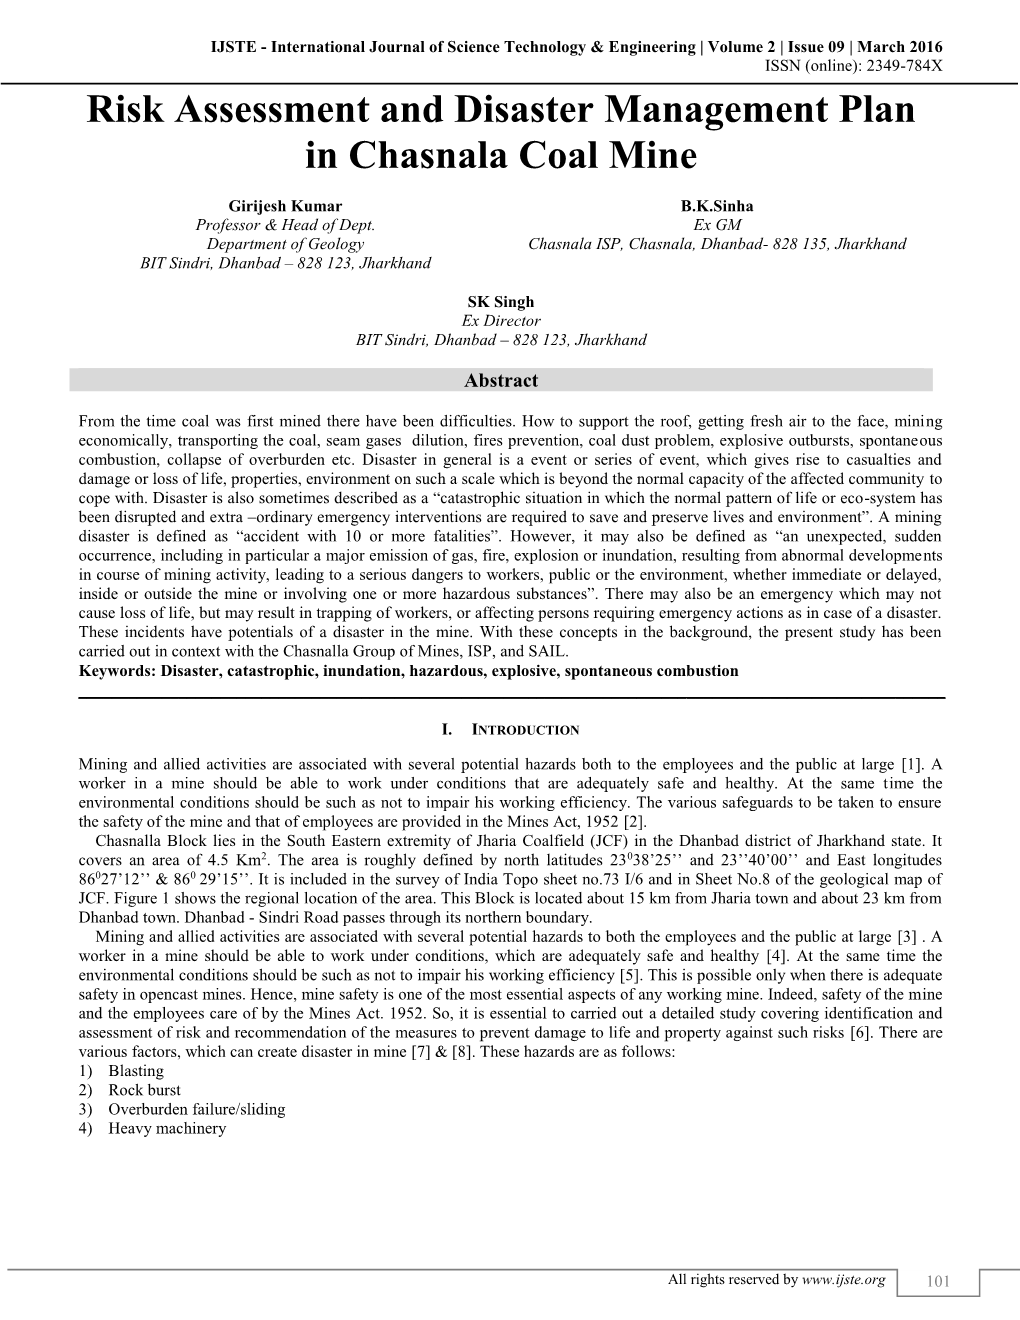 Risk Assessment and Disaster Management Plan in Chasnala Coal Mine (IJSTE/ Volume 2 / Issue 09 / 017)